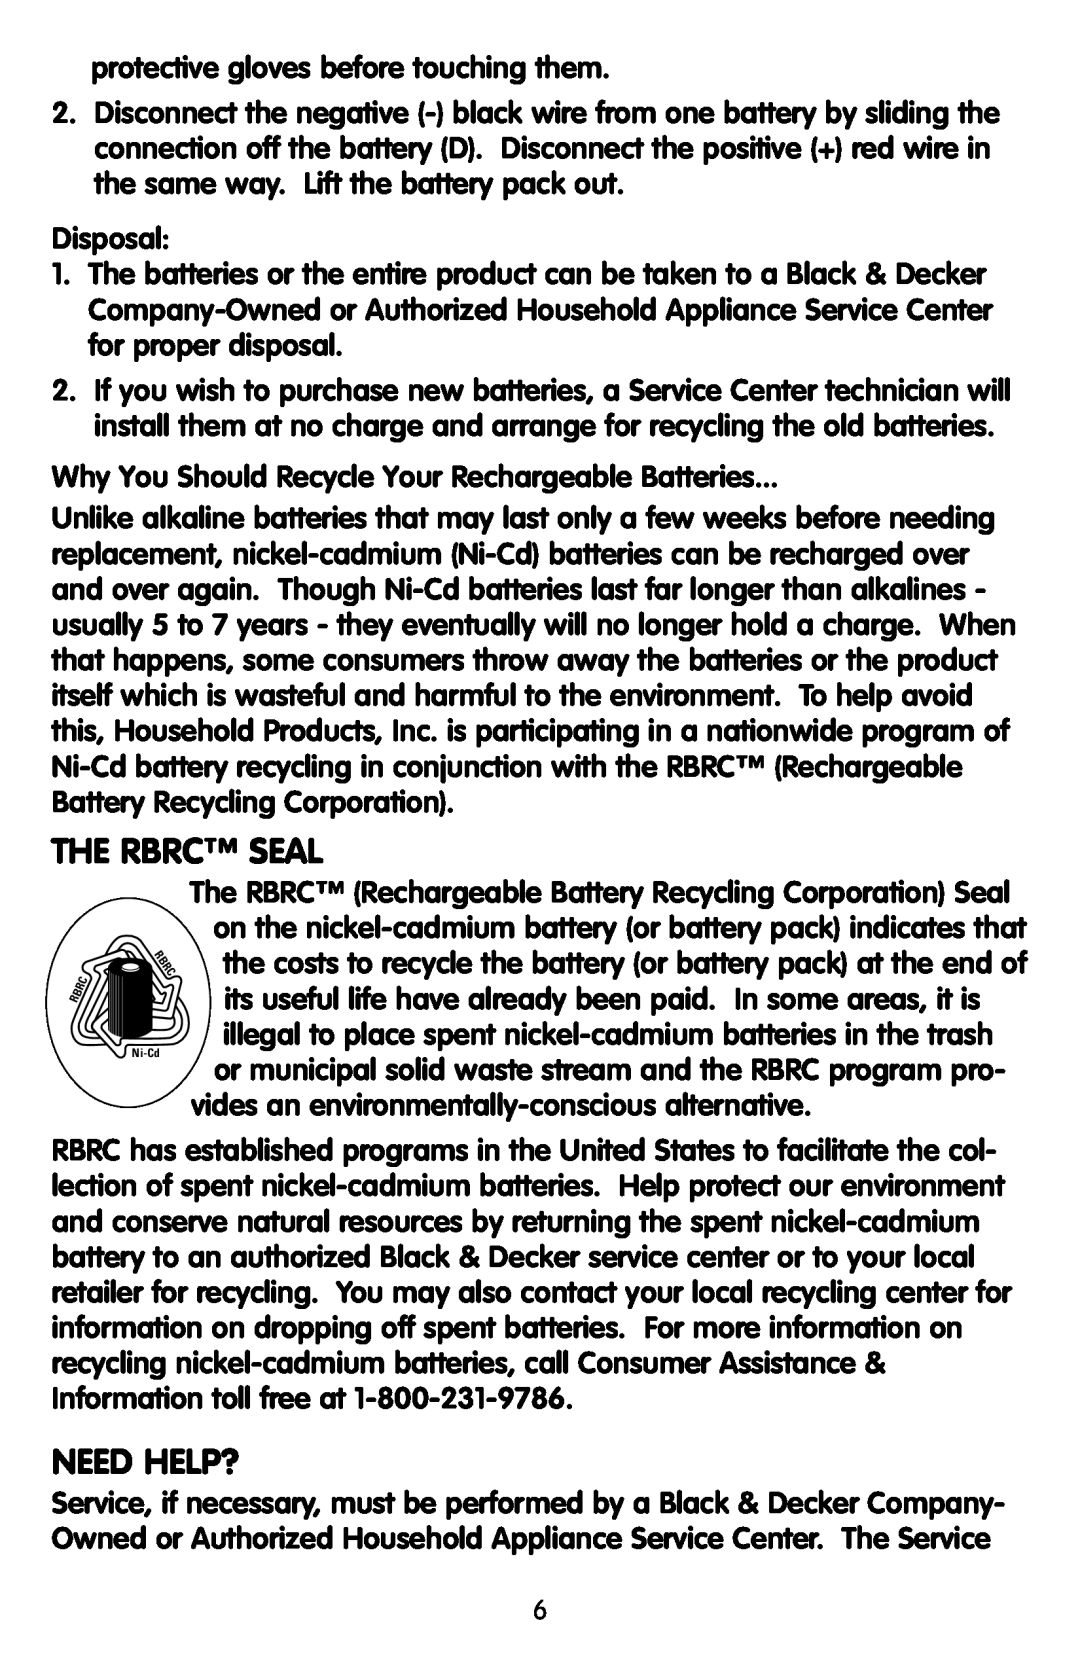 Black & Decker KEC500 manual The Rbrc Seal, Need Help?, protective gloves before touching them, Disposal 